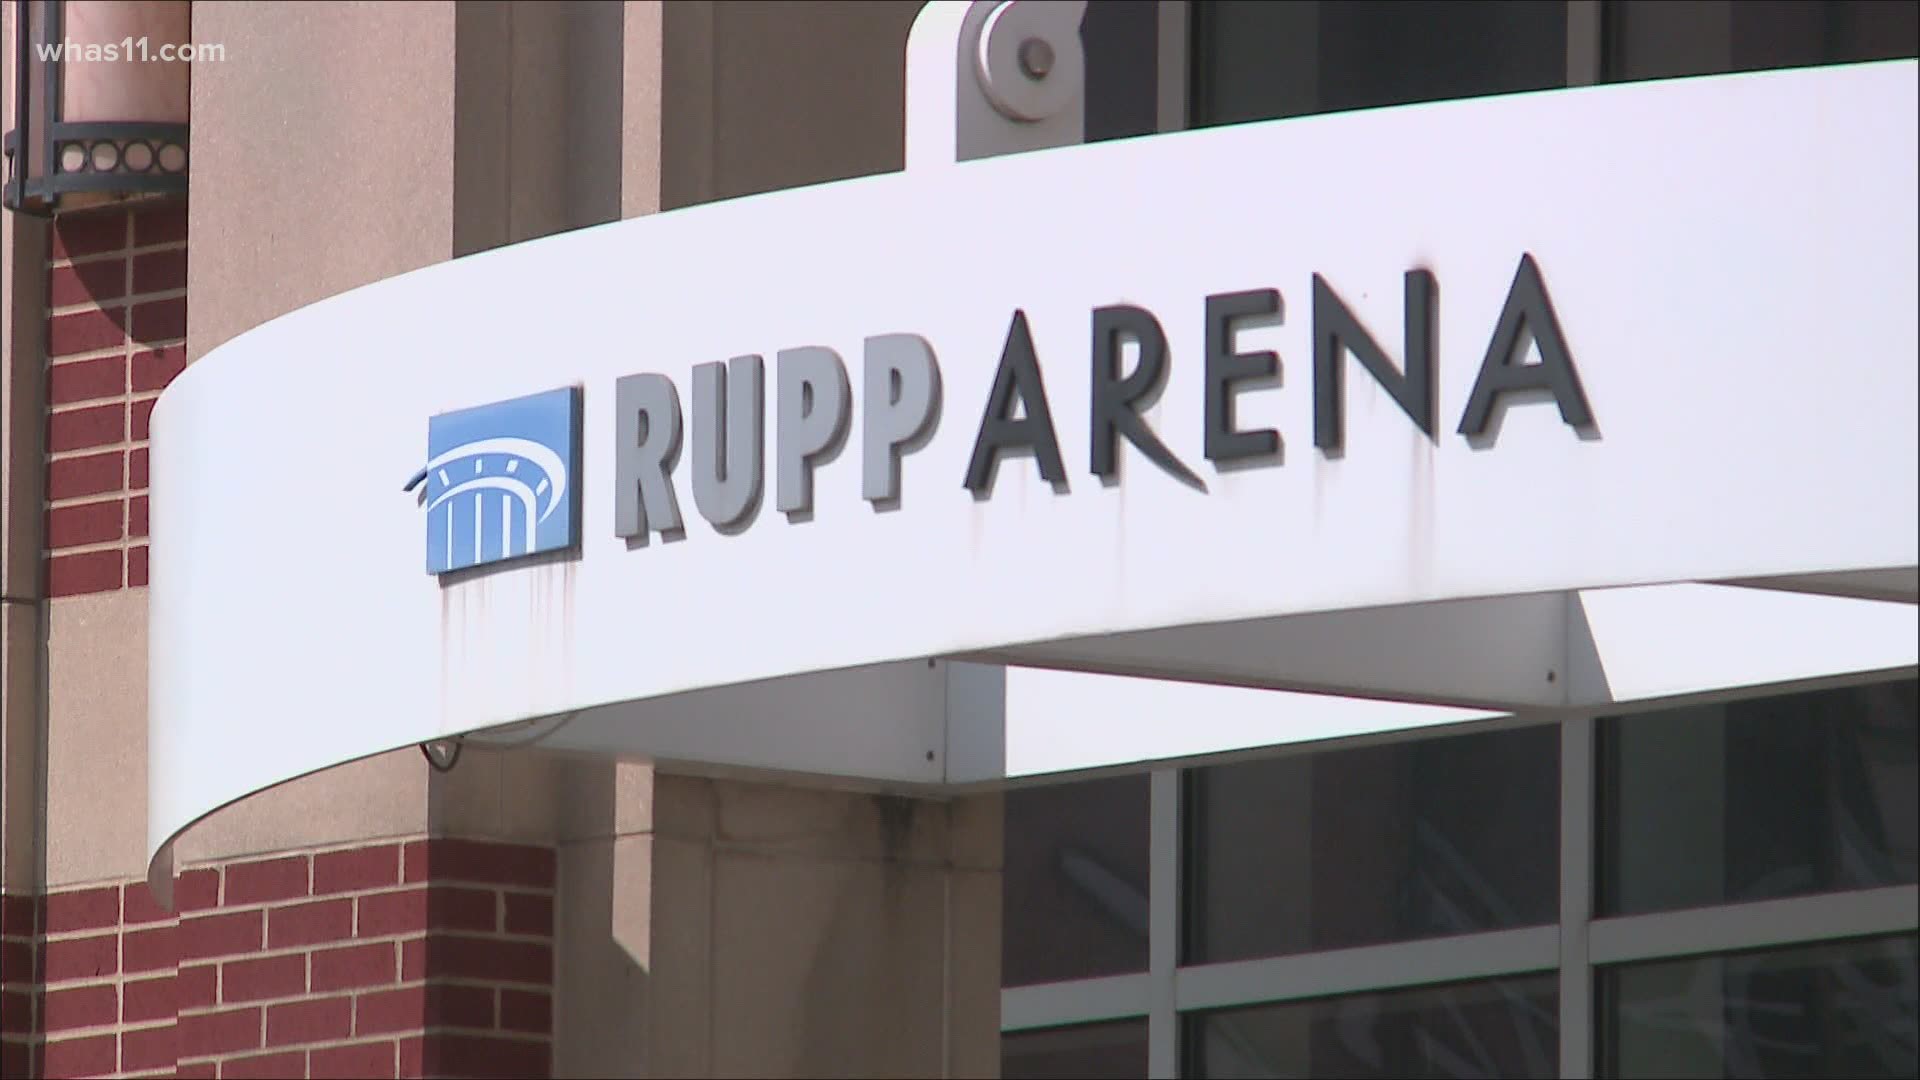 The arena, named after former Kentucky coach Adolph Rupp, has served as the home court for the Kentucky men's basketball team since 1976